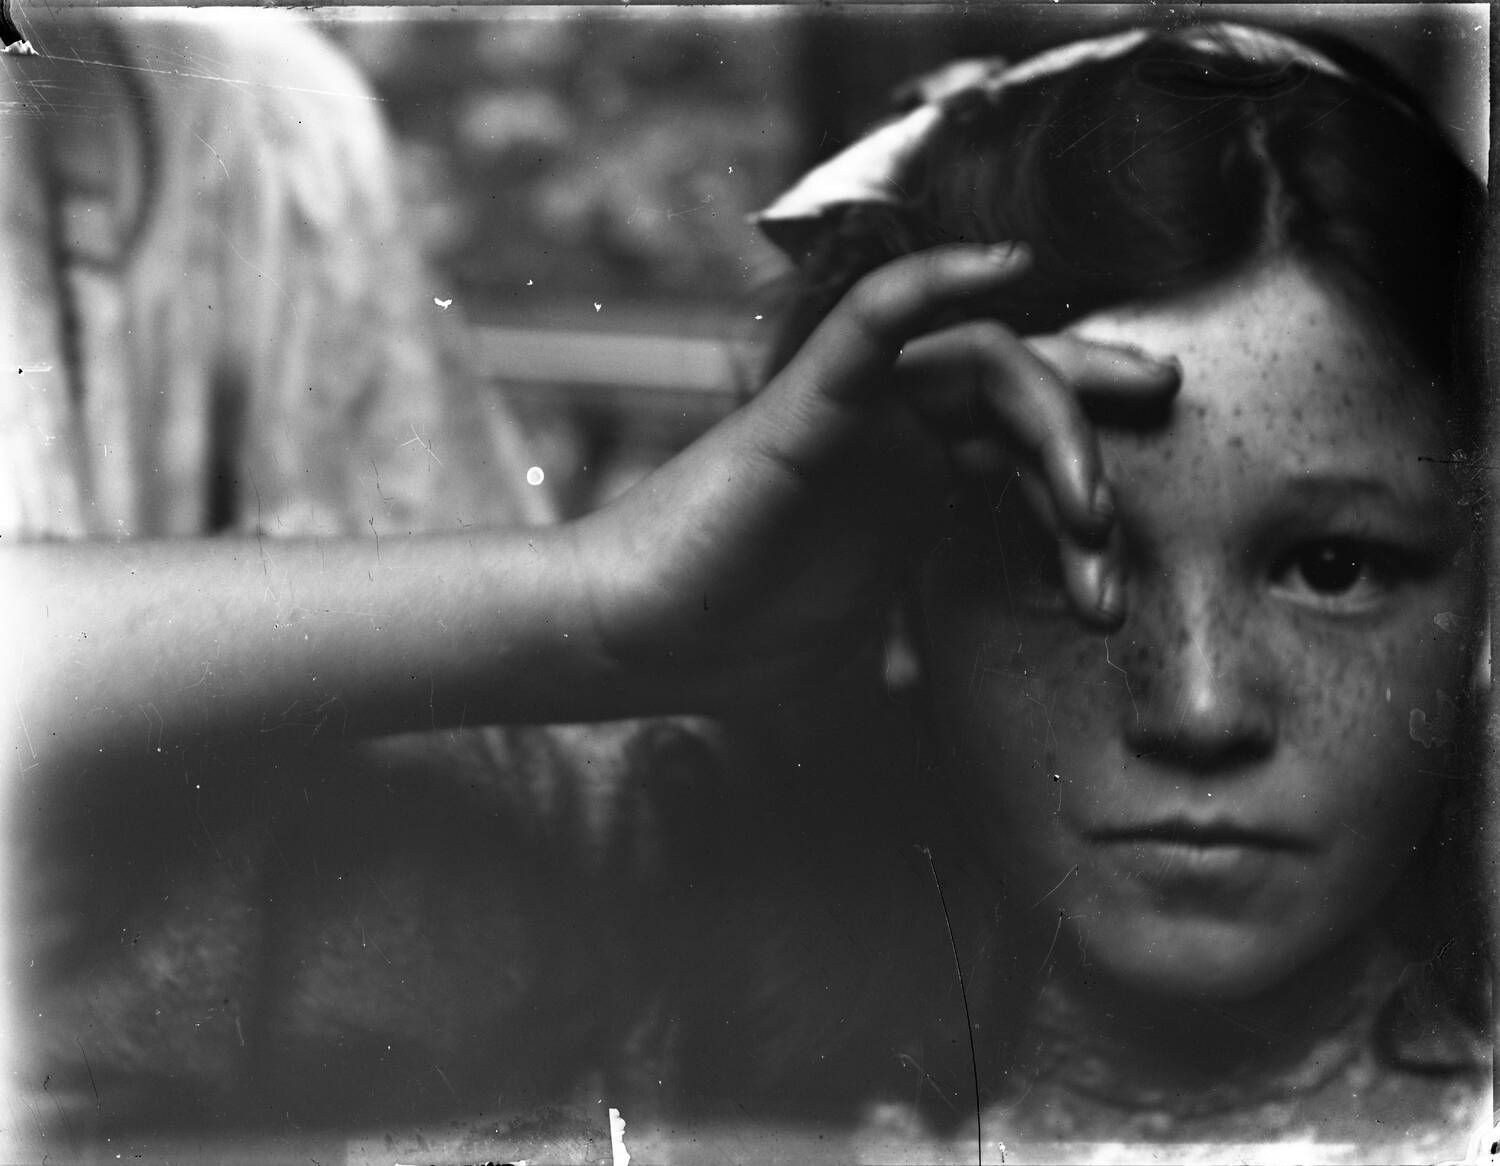 A black and white photo of a girl's head. She has freckles and dark hair. A second person's hand is in front of her right eye.